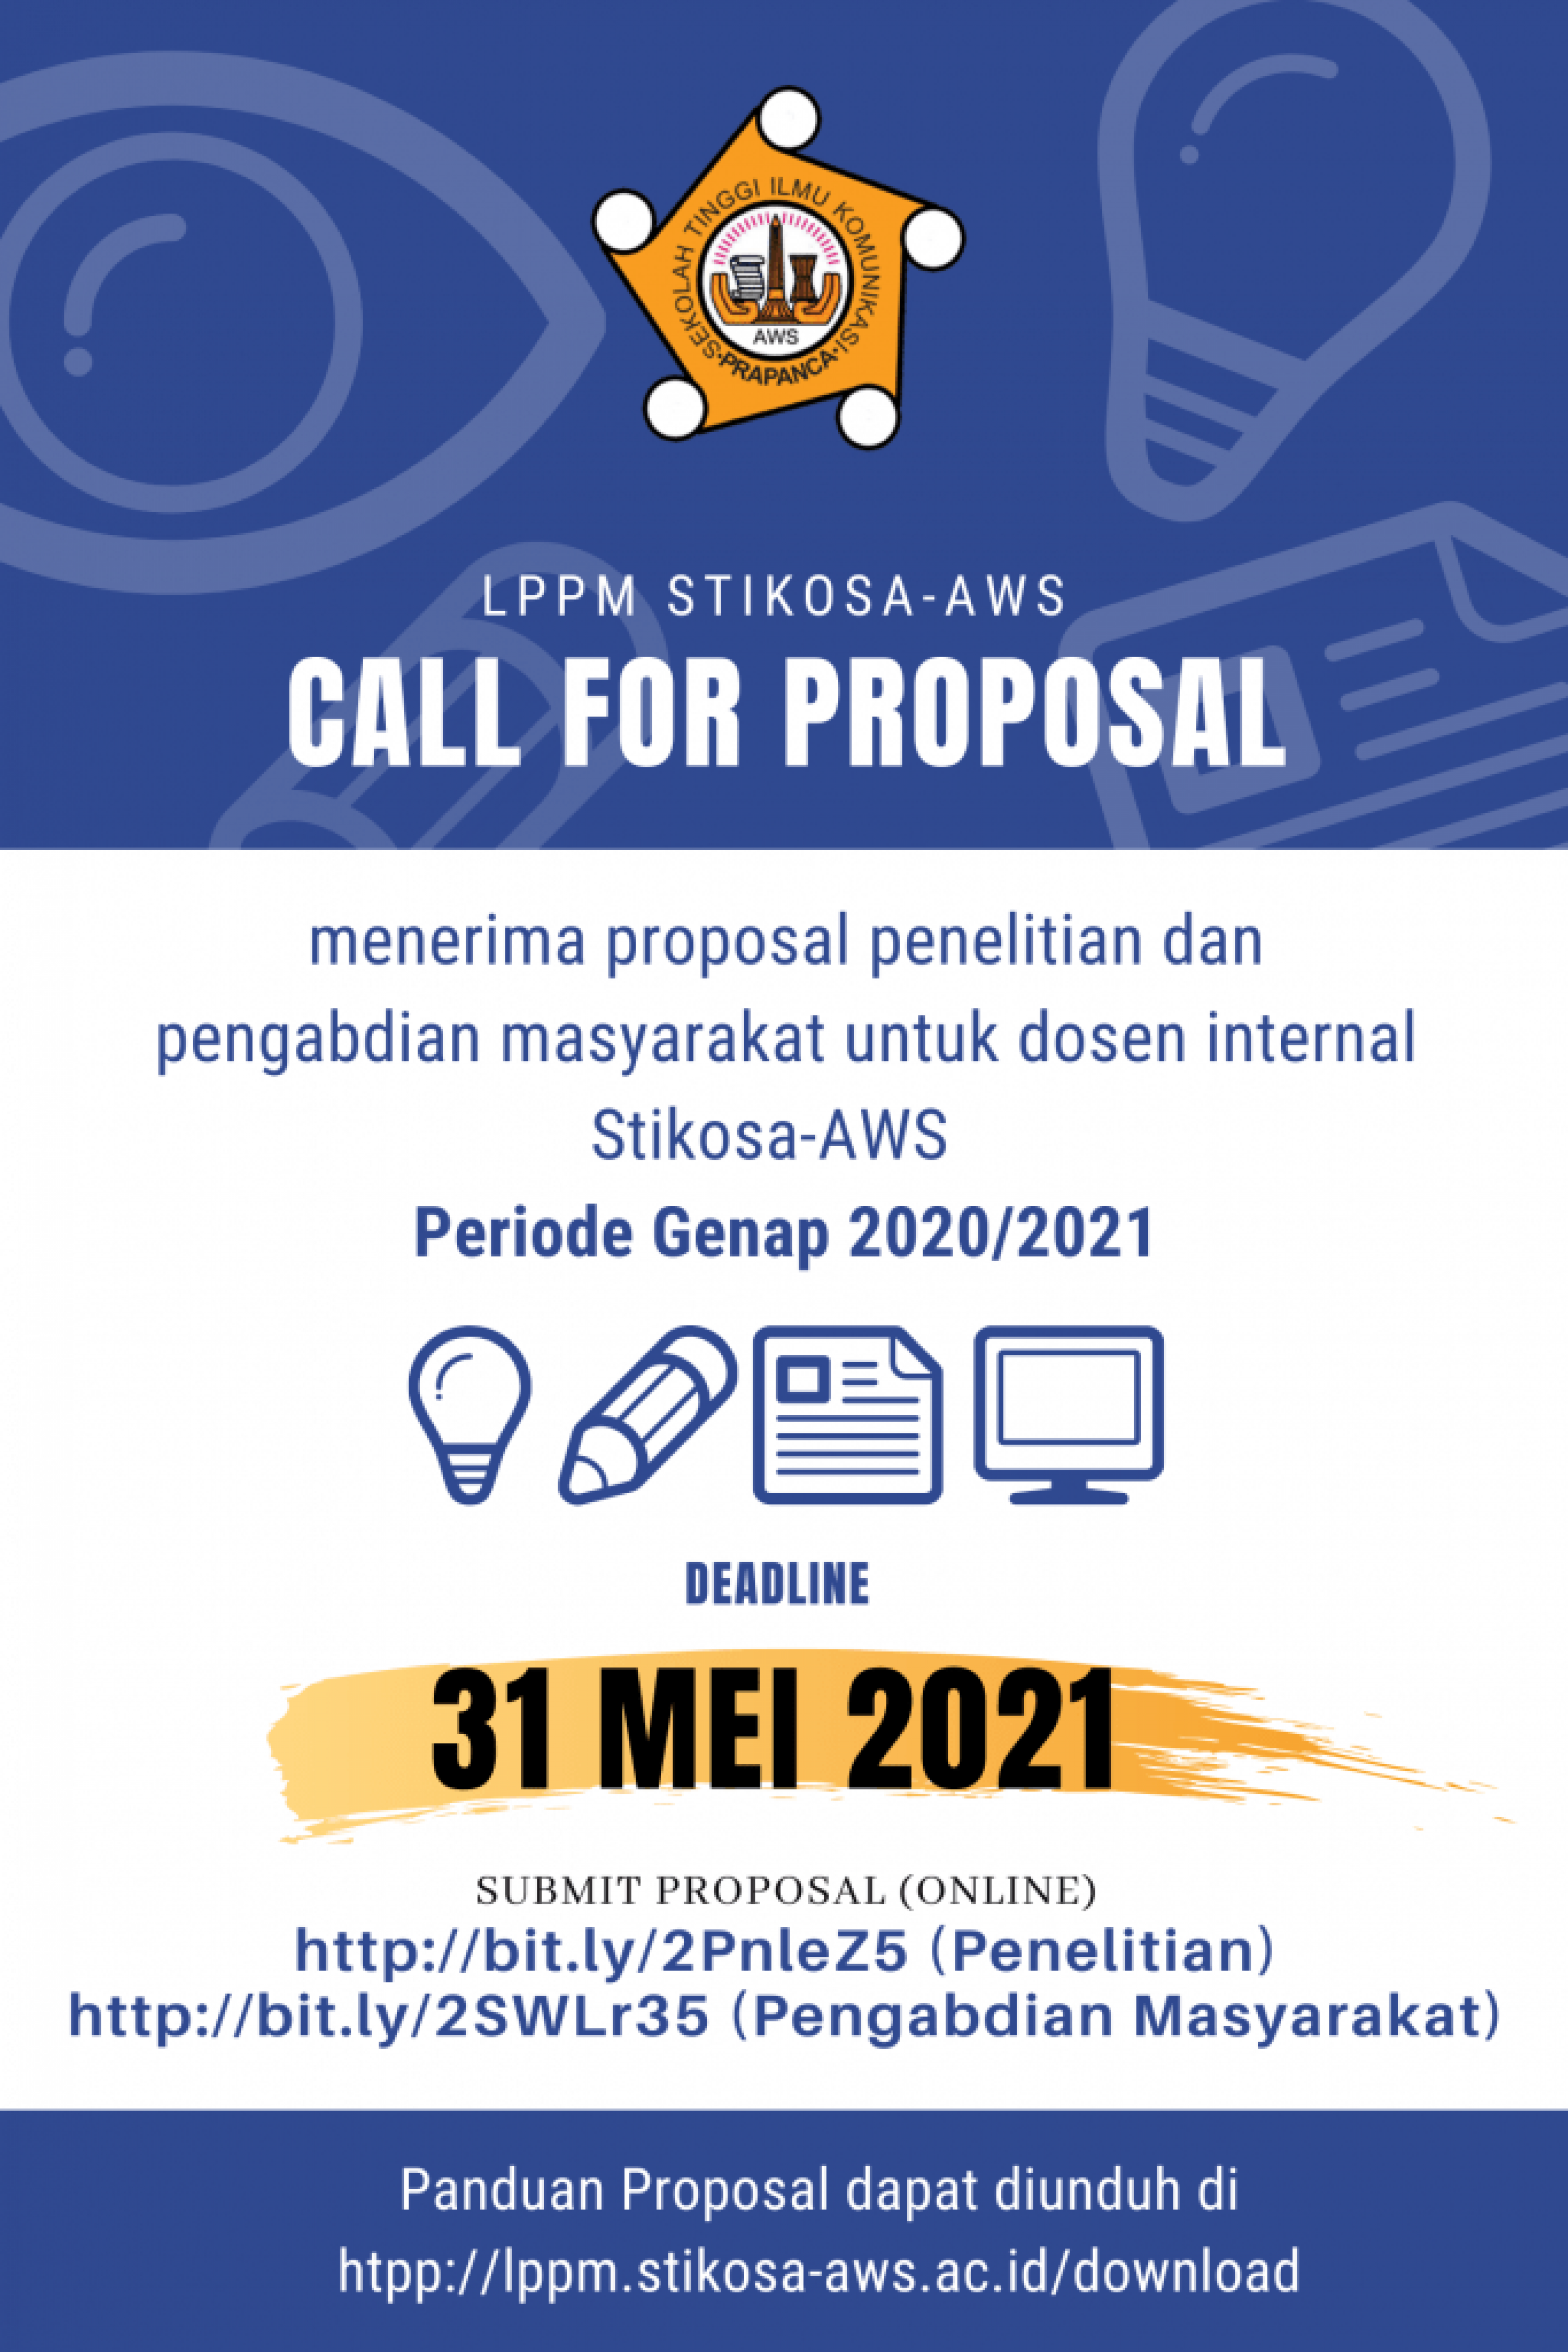 CALL FOR PROPOSAL GENAP 20-21 ext